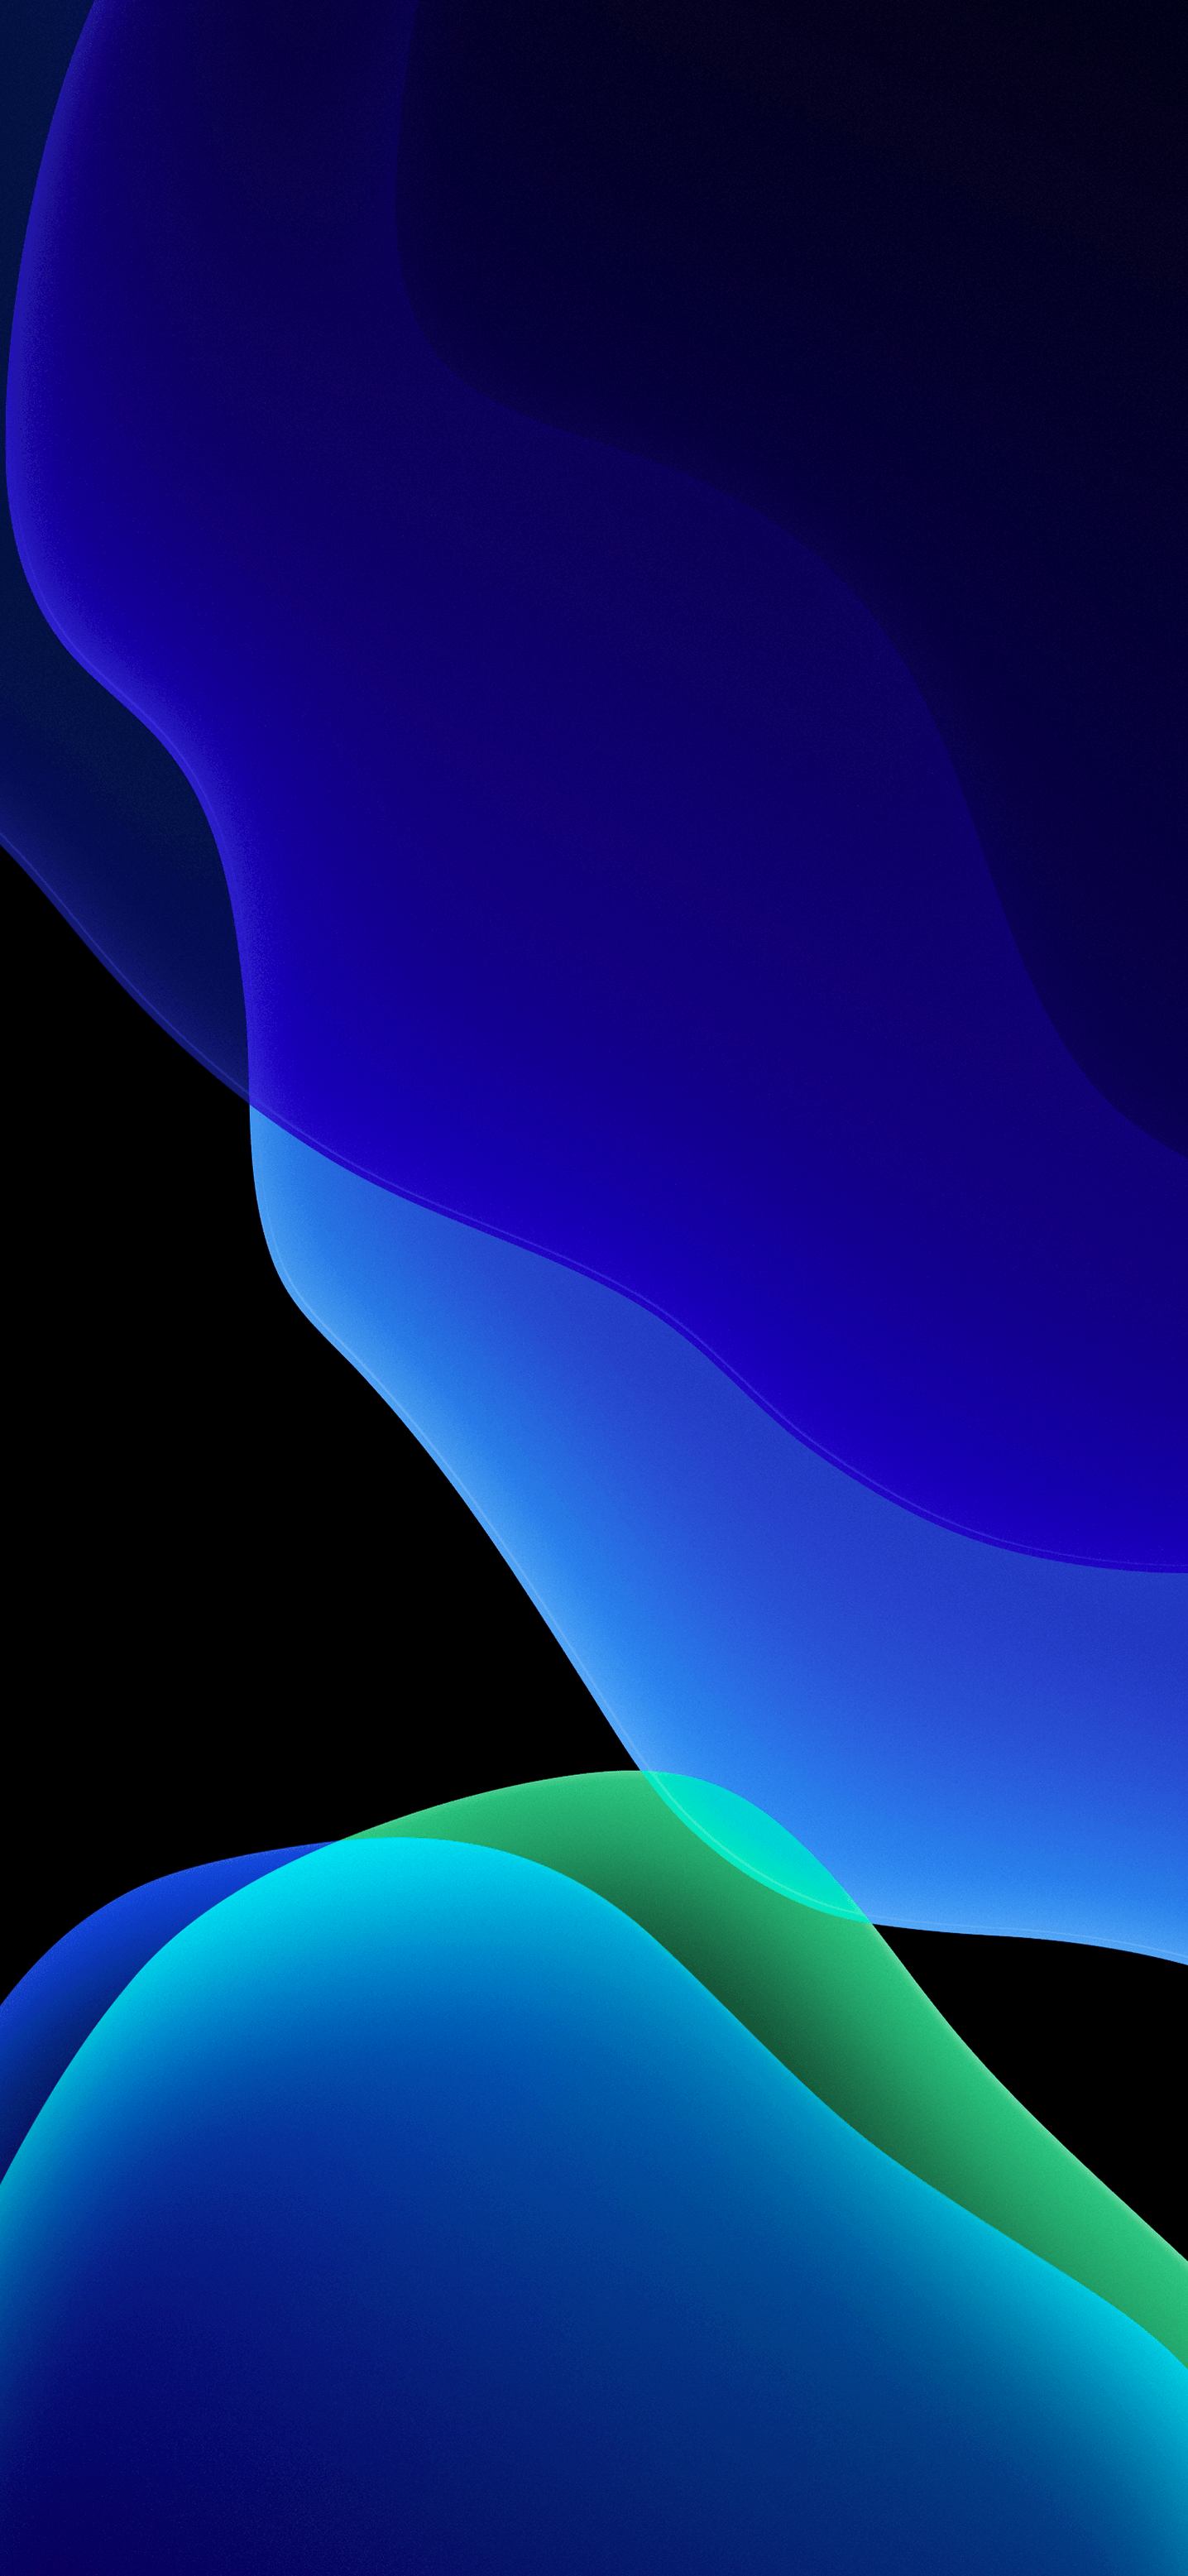 Iphone X Apple Wallpapers